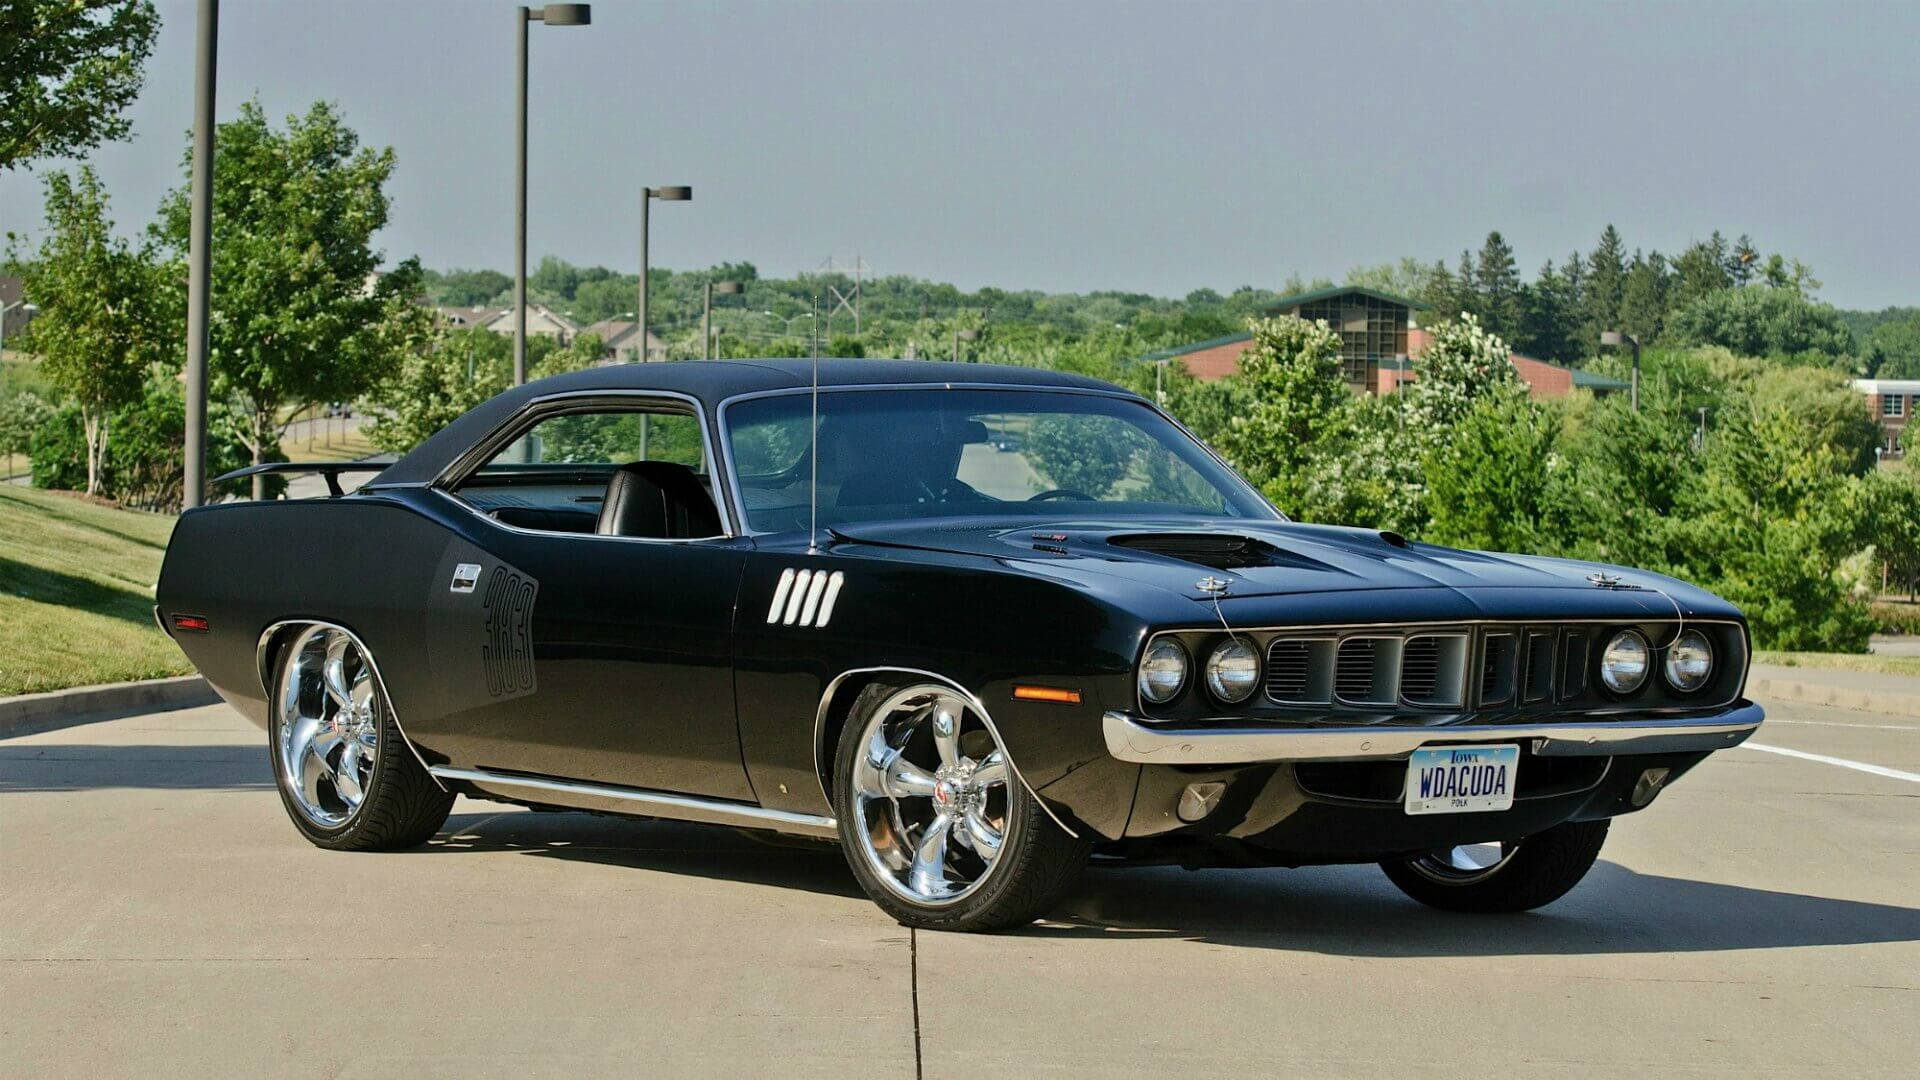 Classic Black 1974 Plymouth Barracuda on the Street Wallpaper